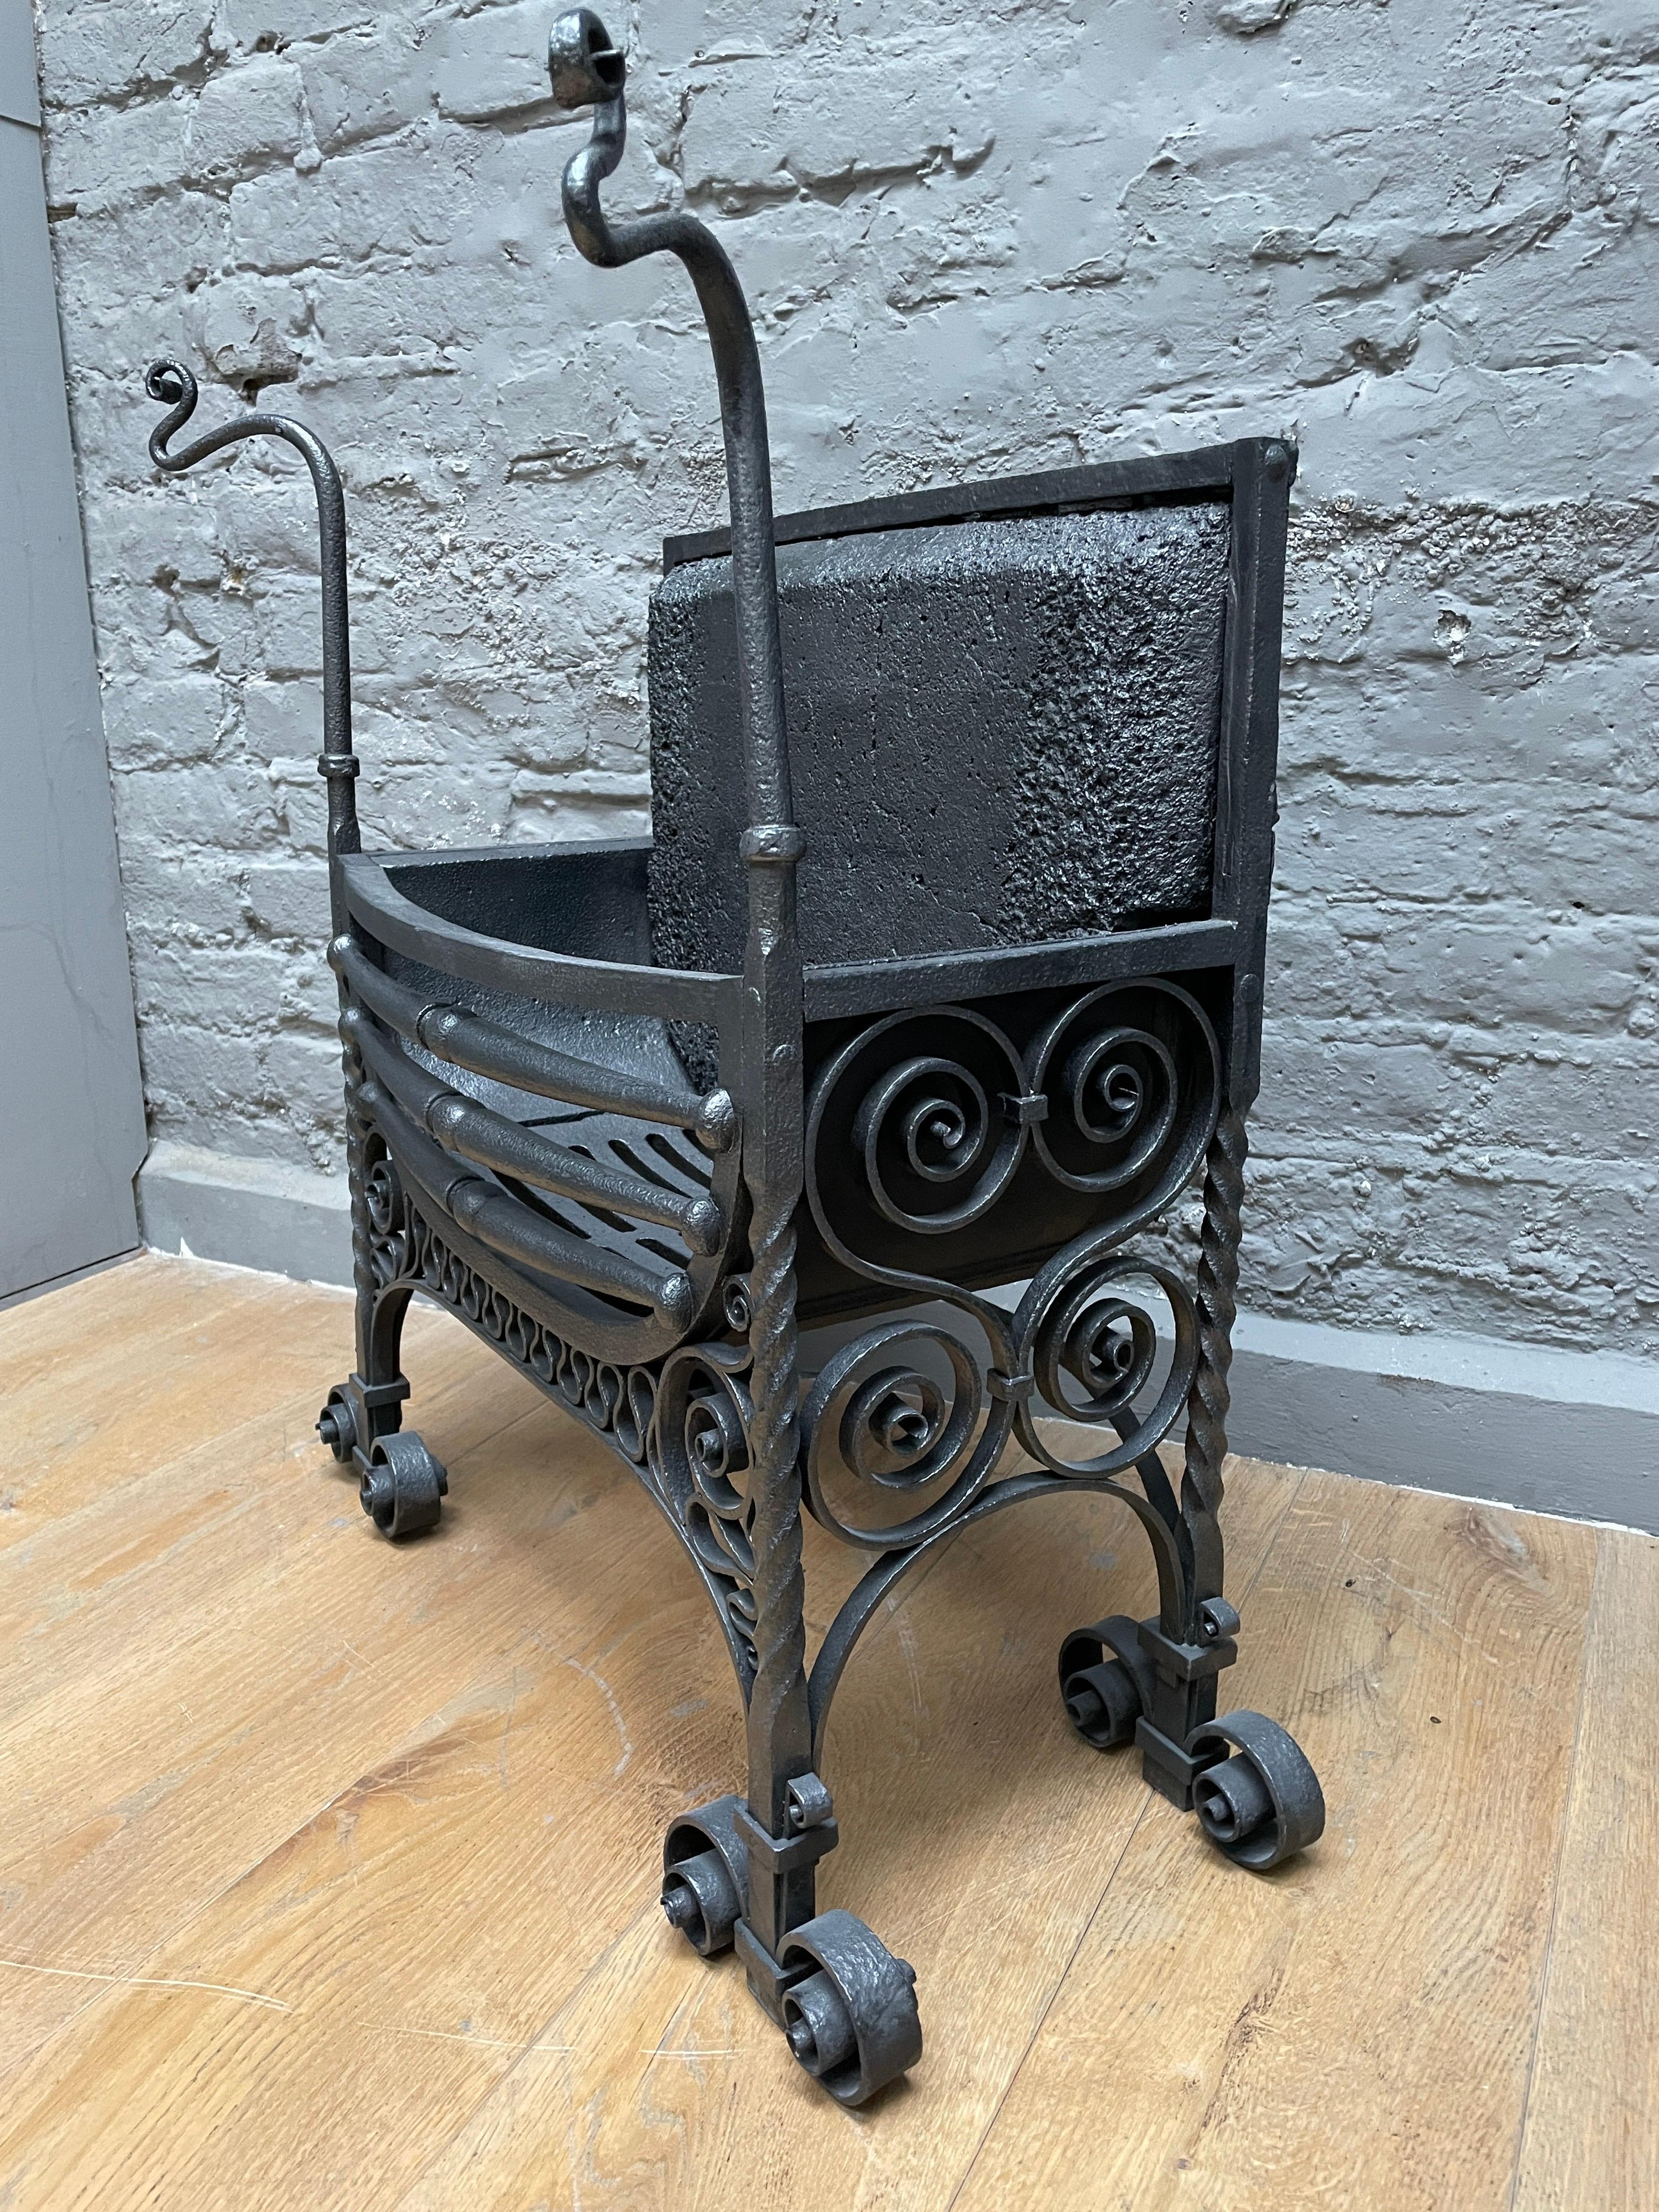 An English Antique Arts & Crafts Wrought Iron Fire Grate In Good Condition For Sale In London, GB